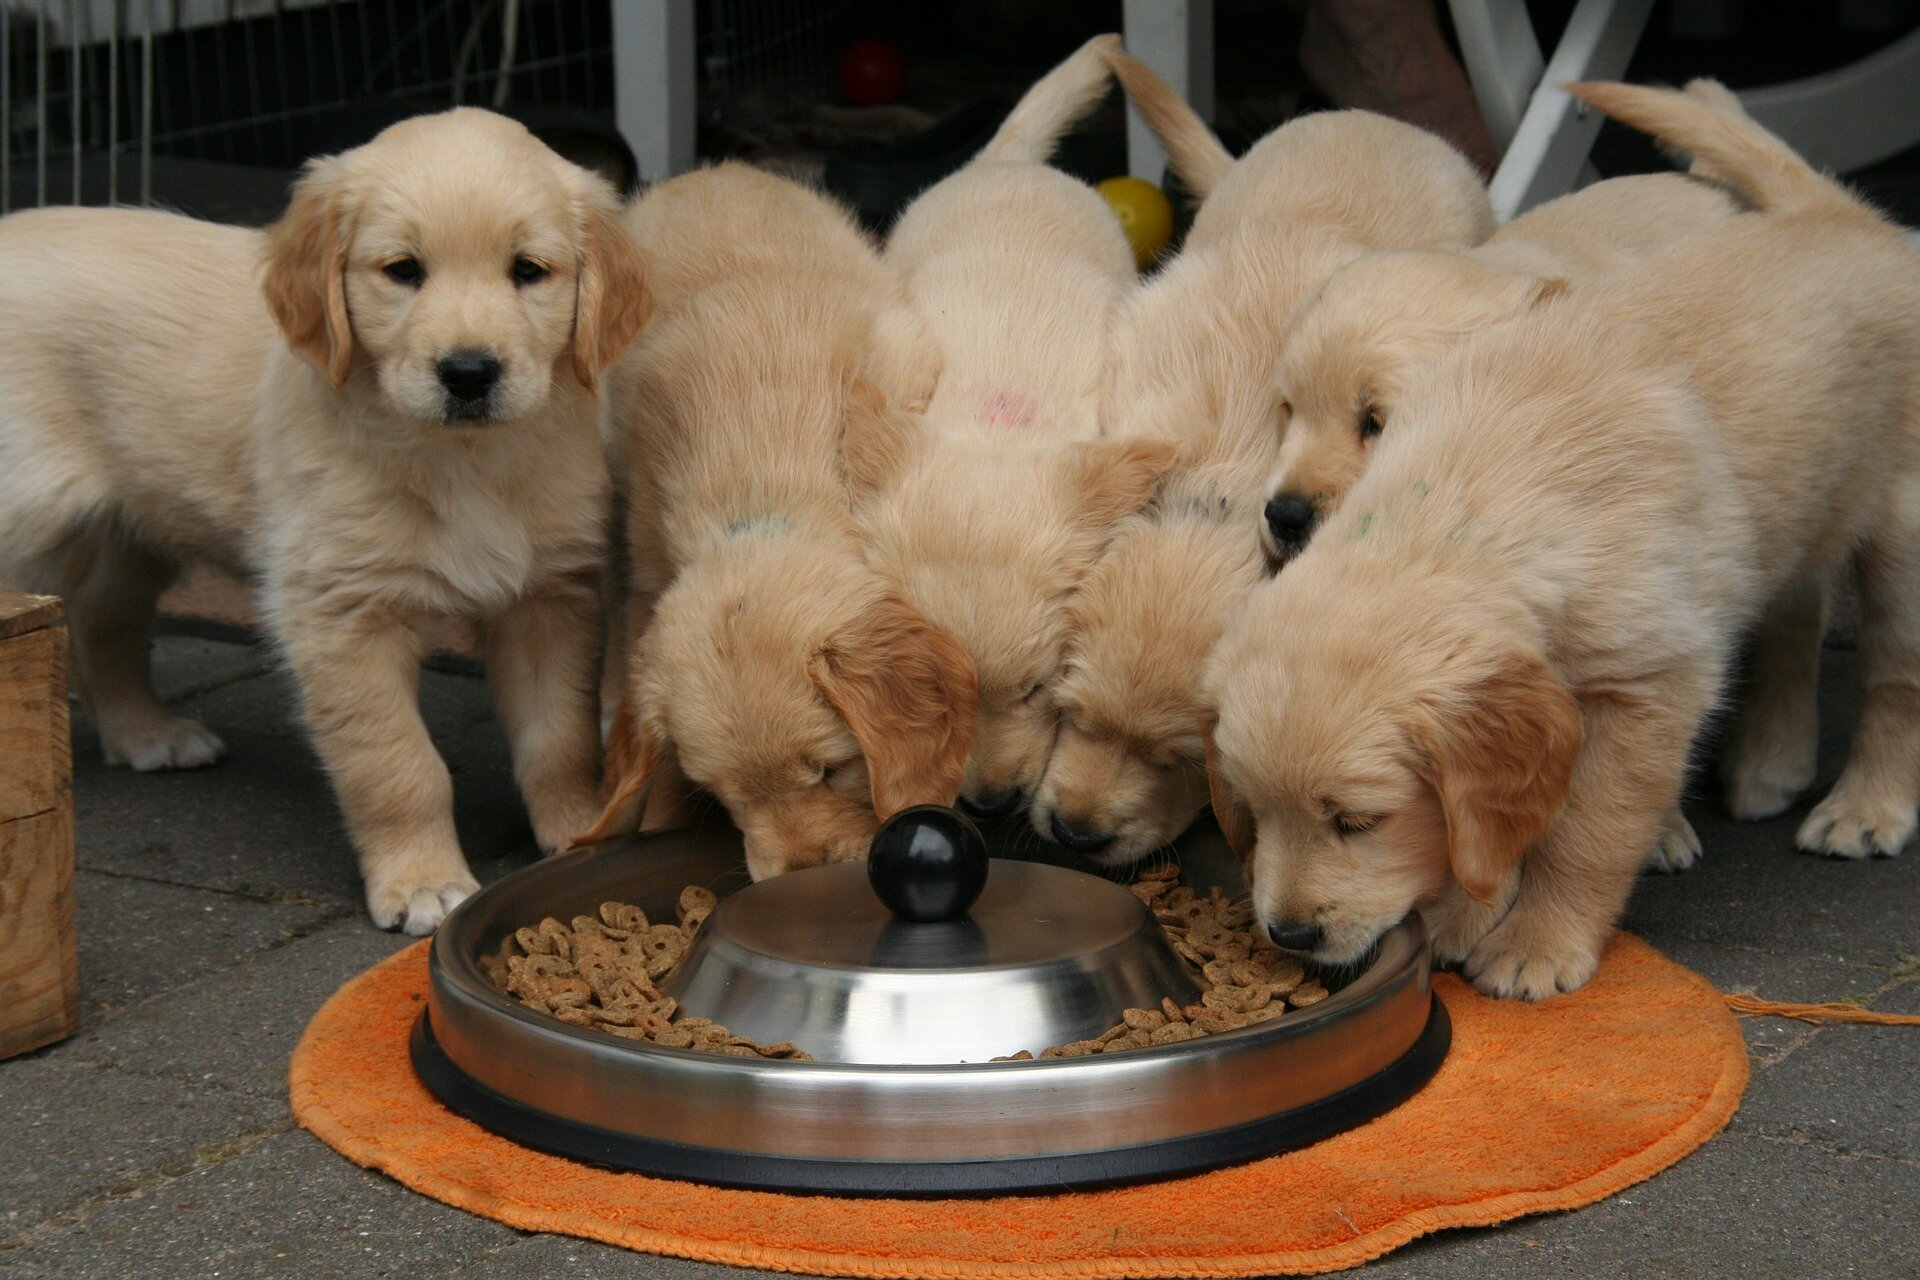 Golden Retriever puppies eating together from the same bowl